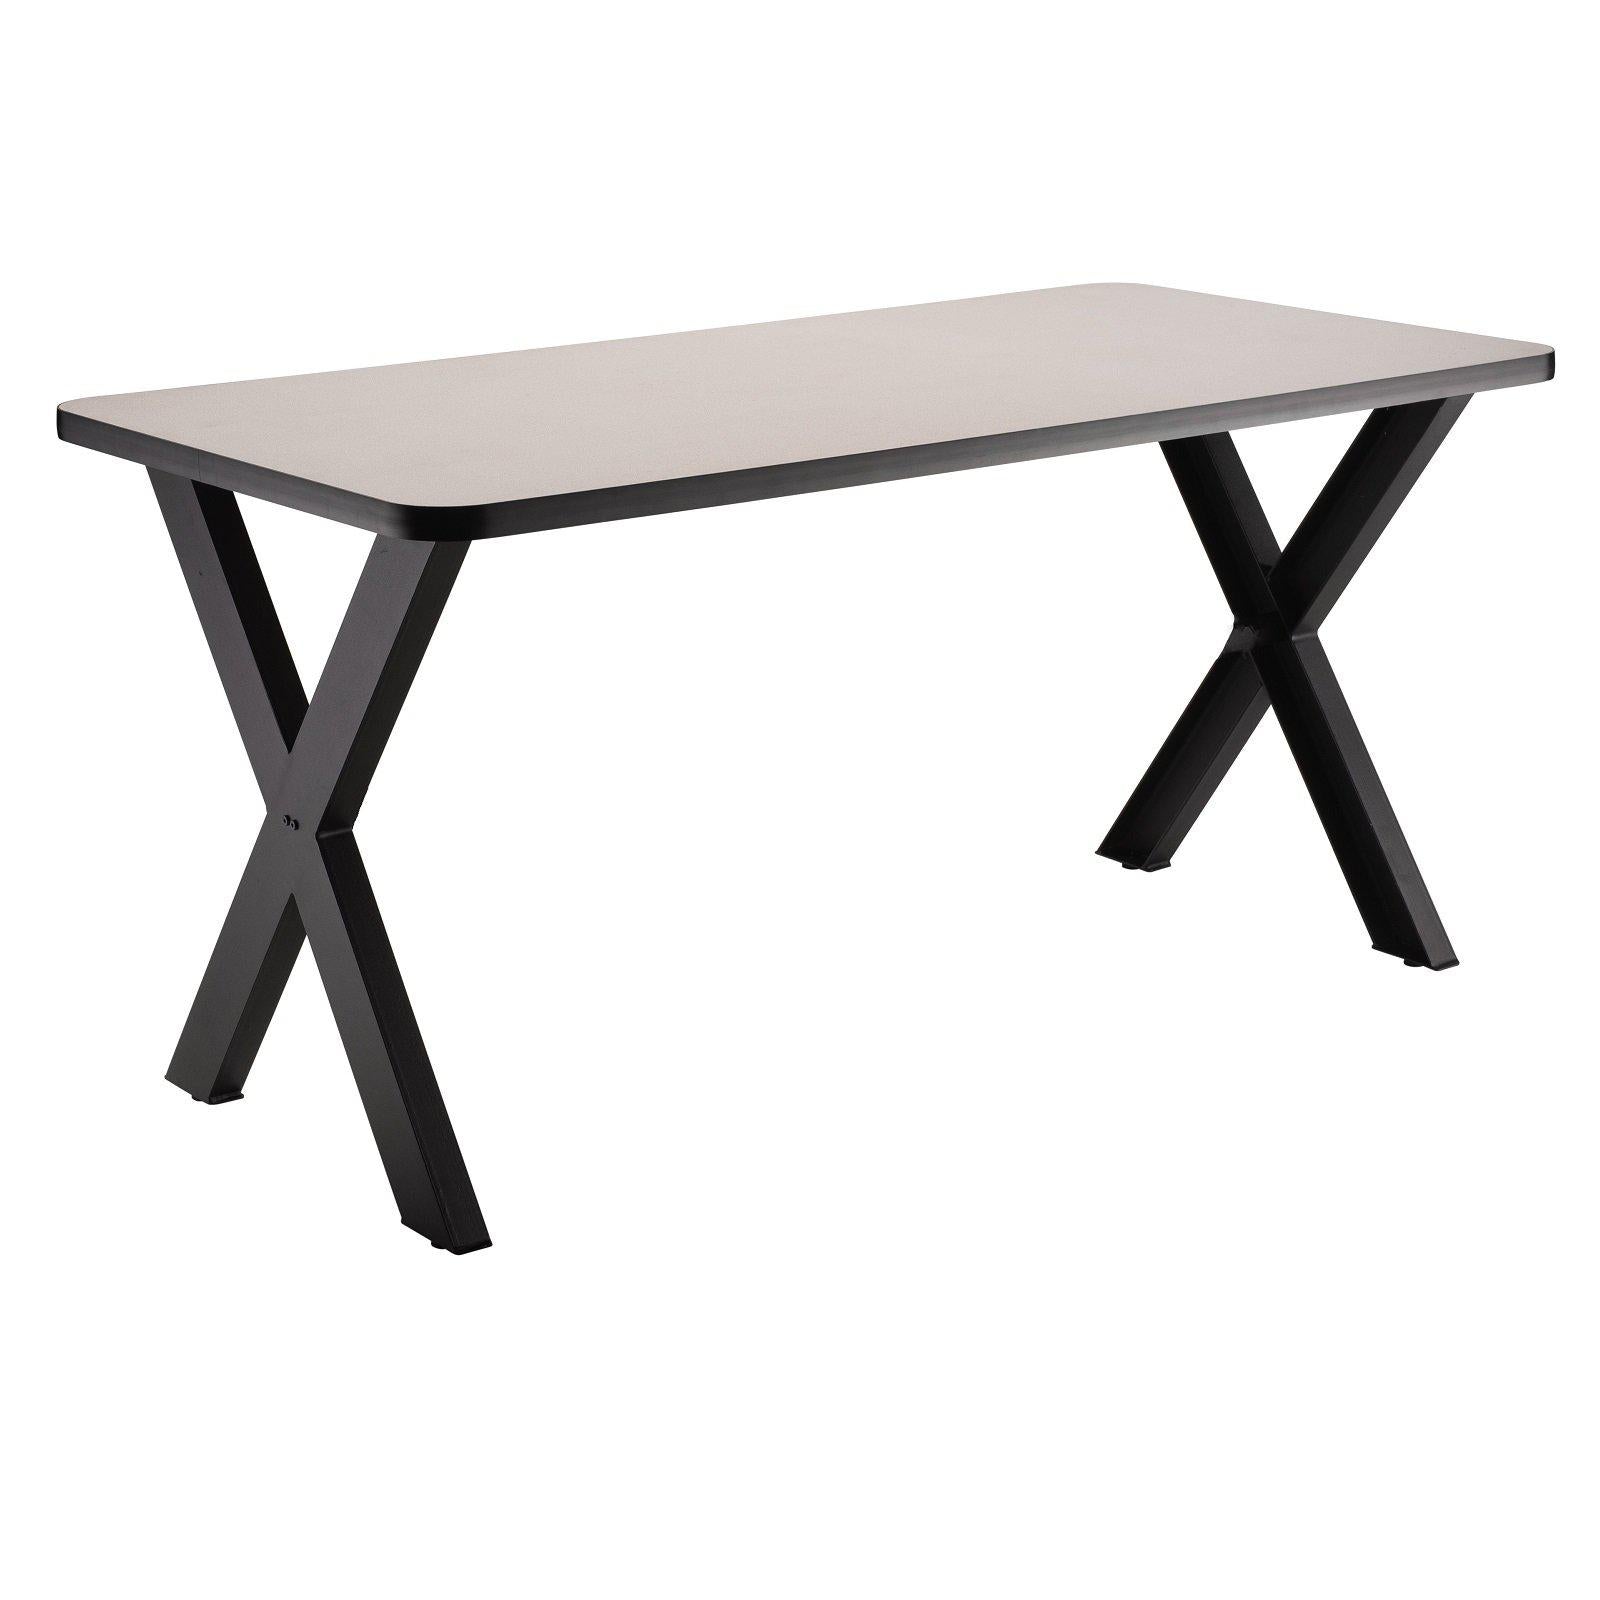 Collaborator Table, 30" x 72", Rectangle, 30" Dining Height, High Pressure Laminate Top, MDF Core